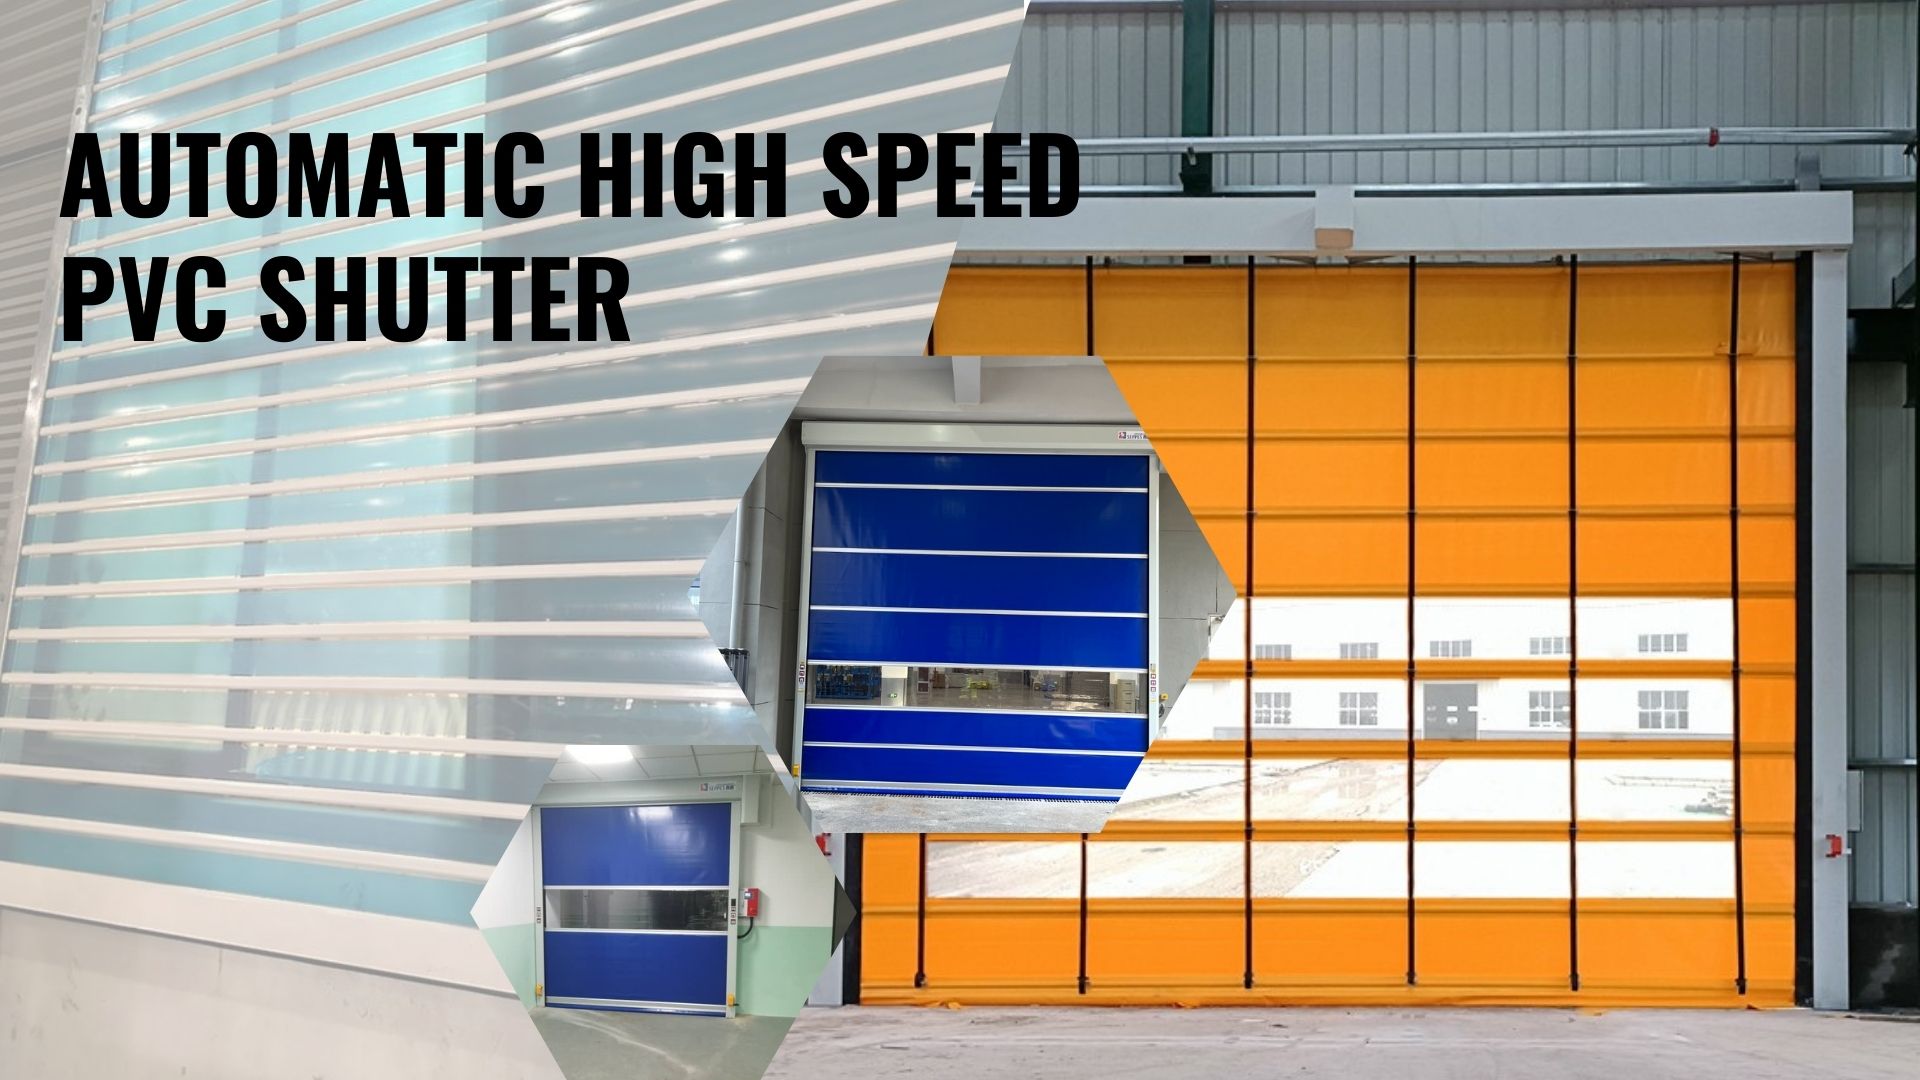 Automatic High Speed PVC Shutter